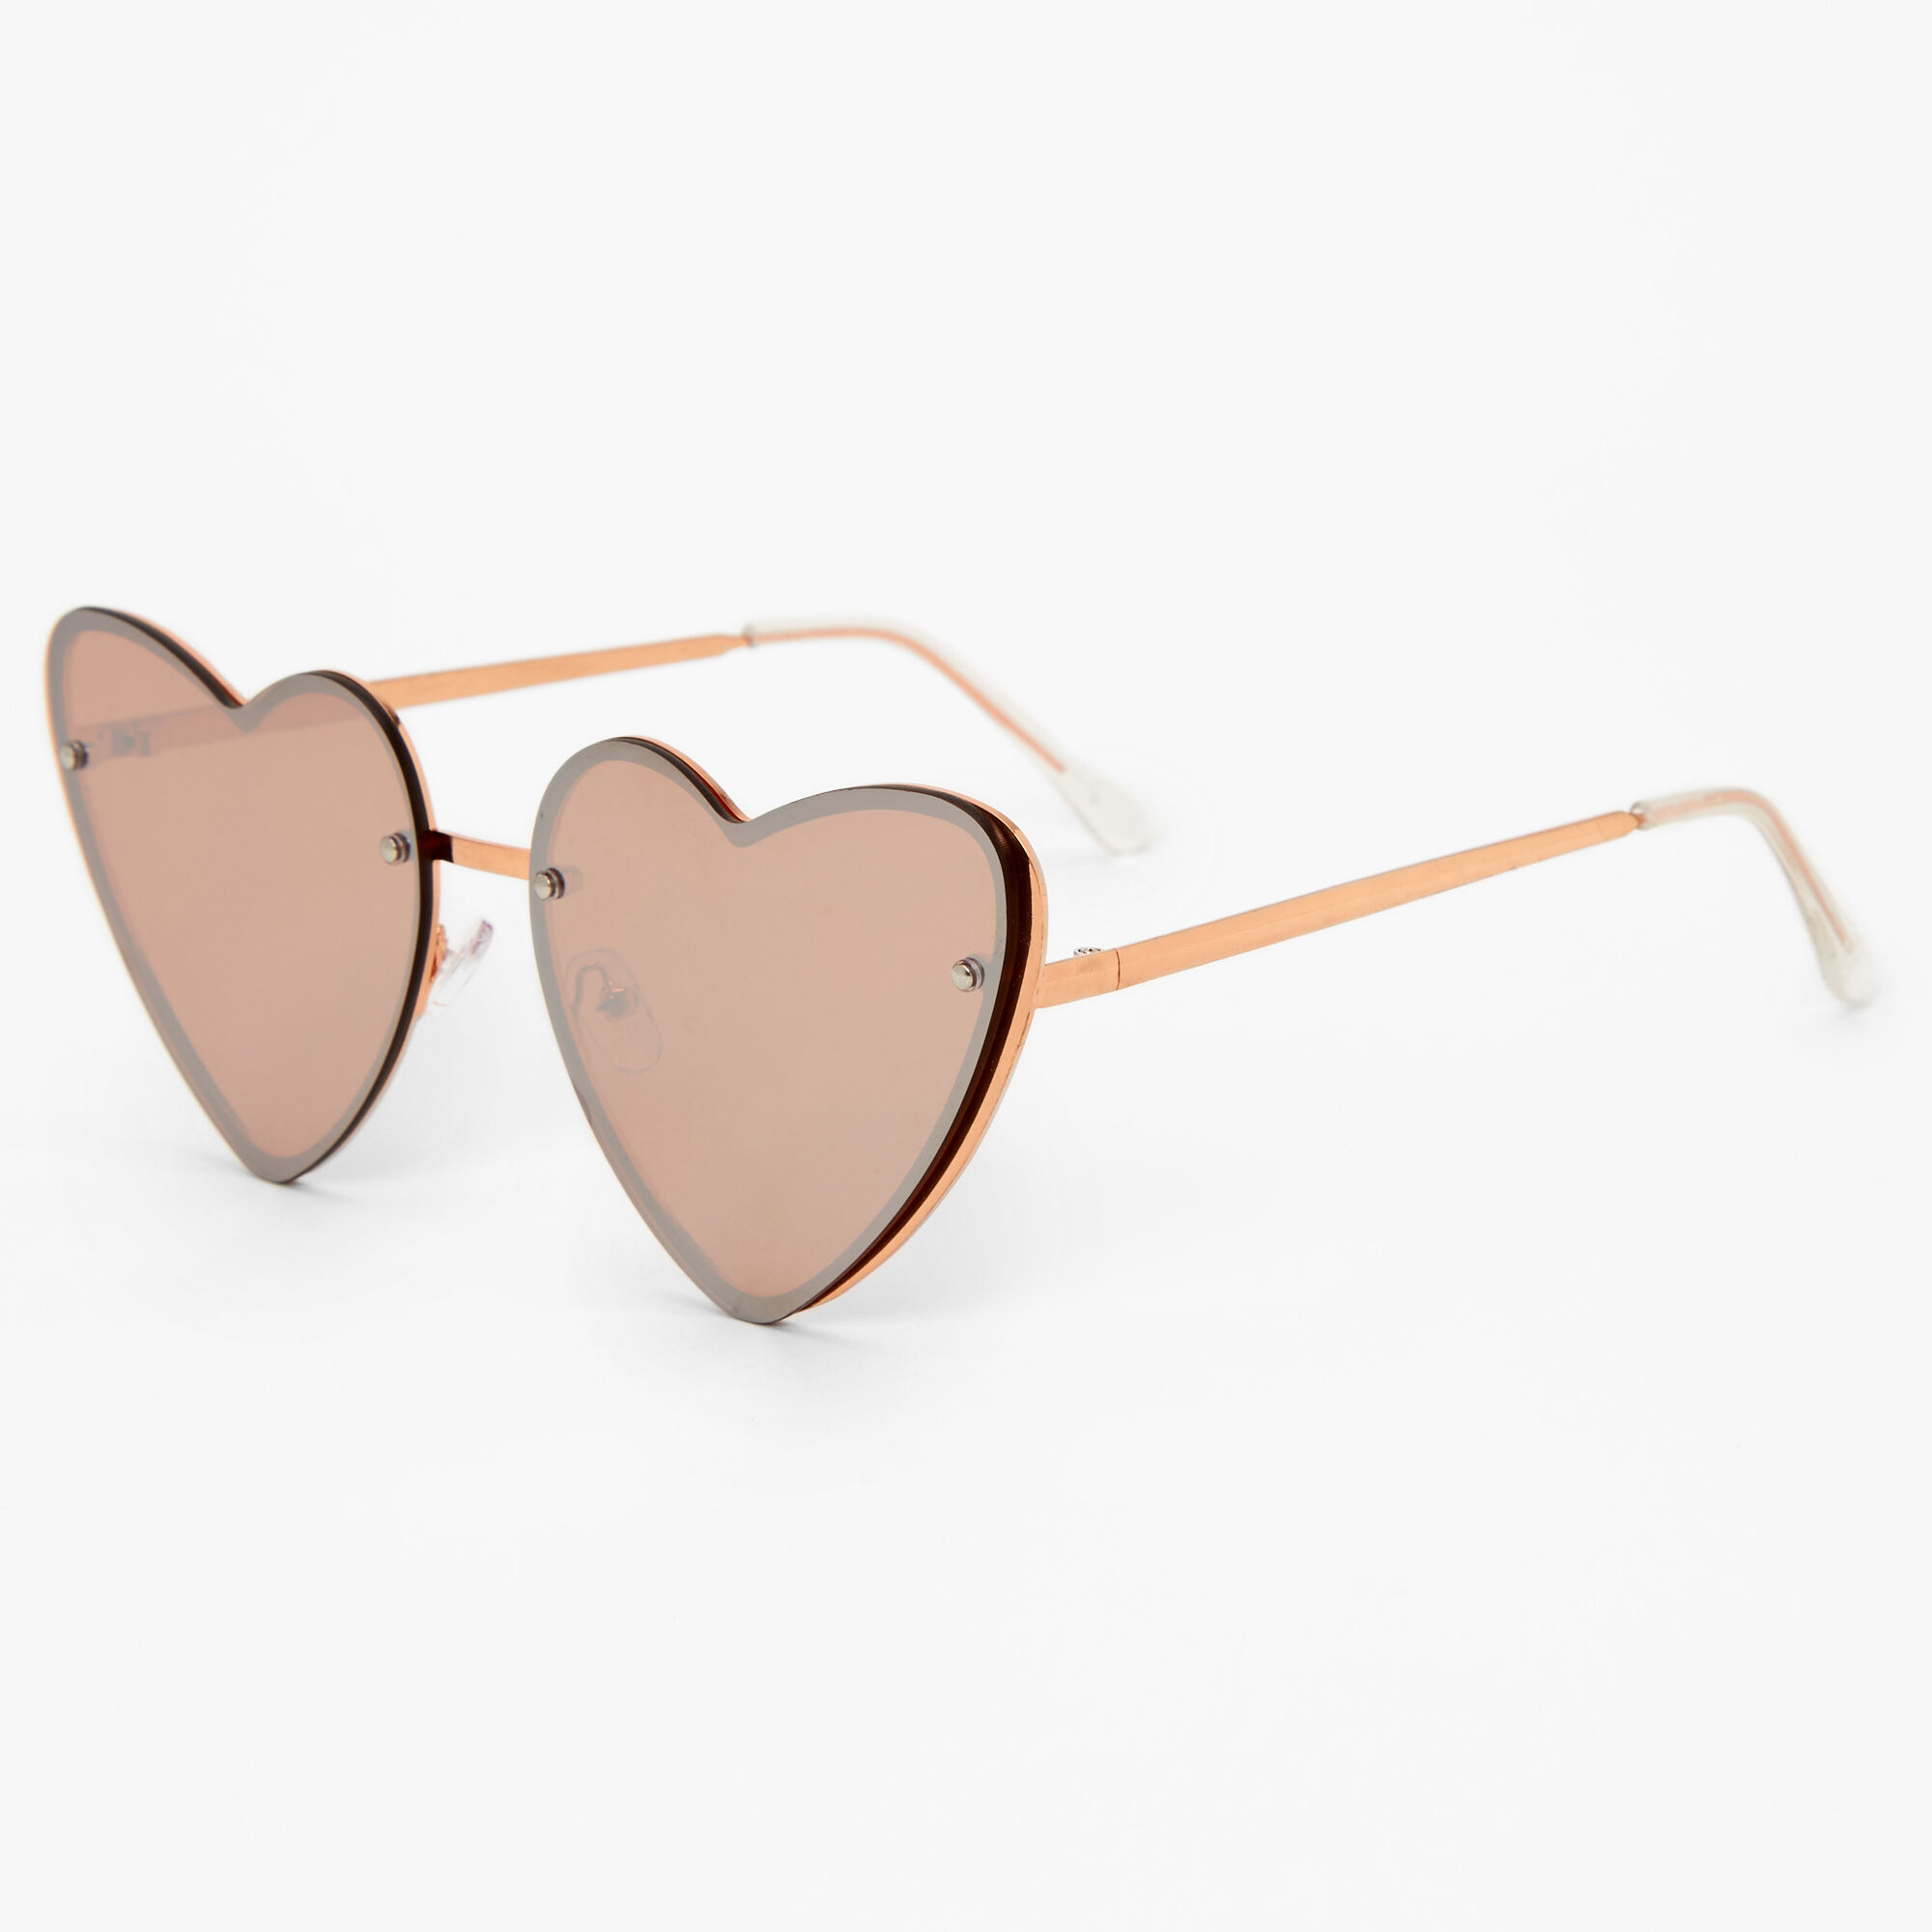 View Claires Rose Heart Sunglasses Gold information